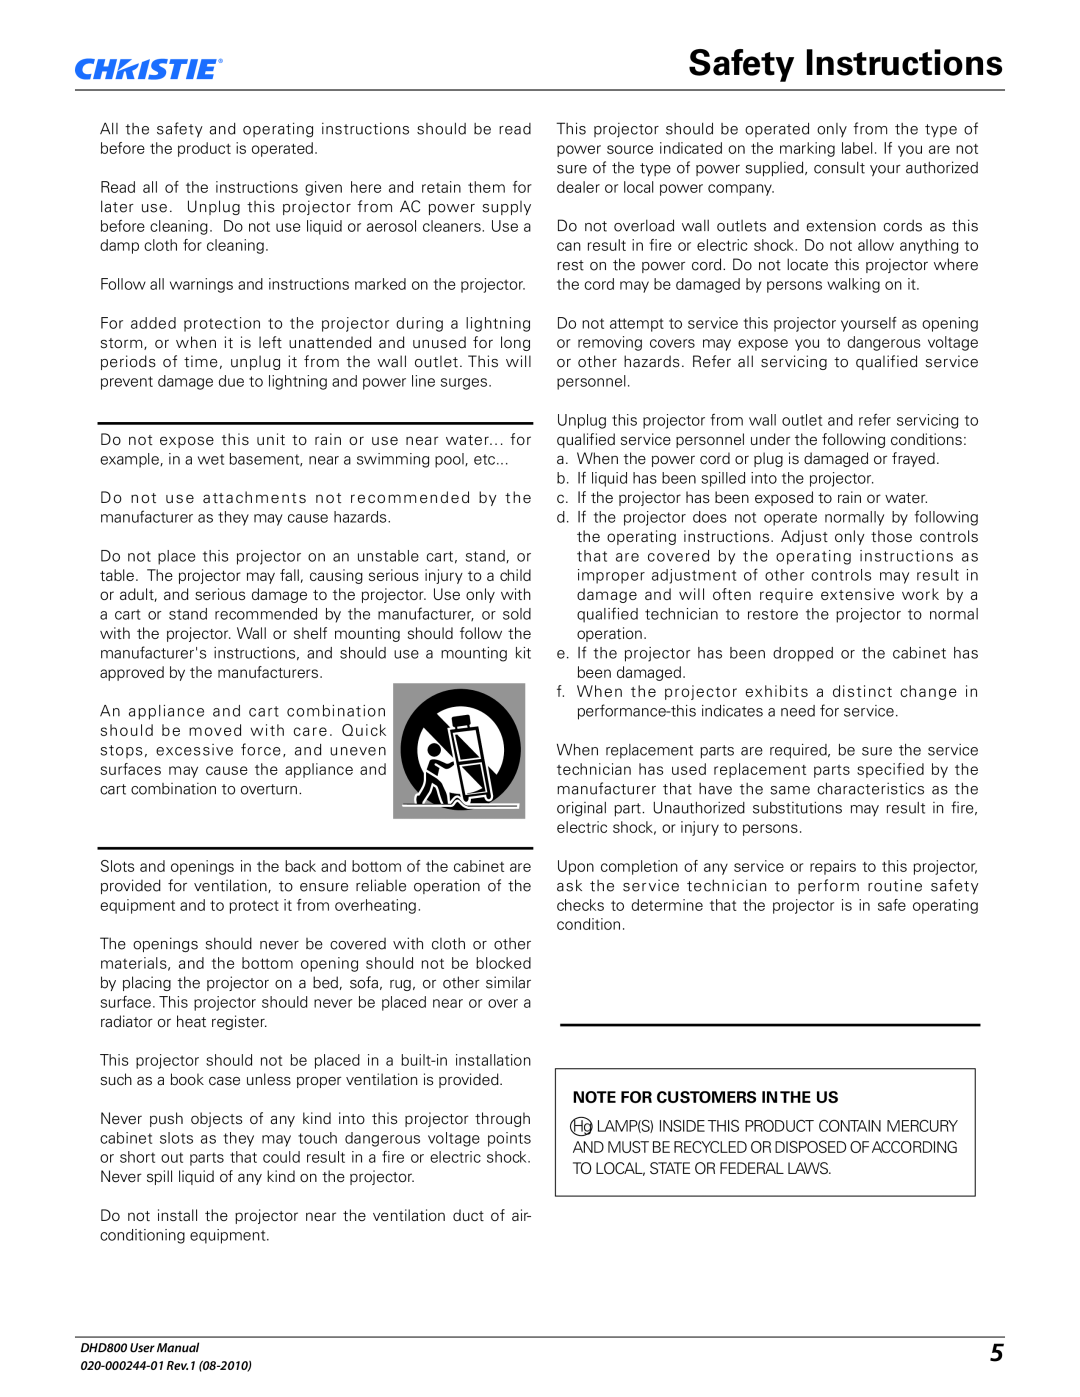 Christie Digital Systems DHD800 user manual Safety Instructions, Note For Customers In The Us 